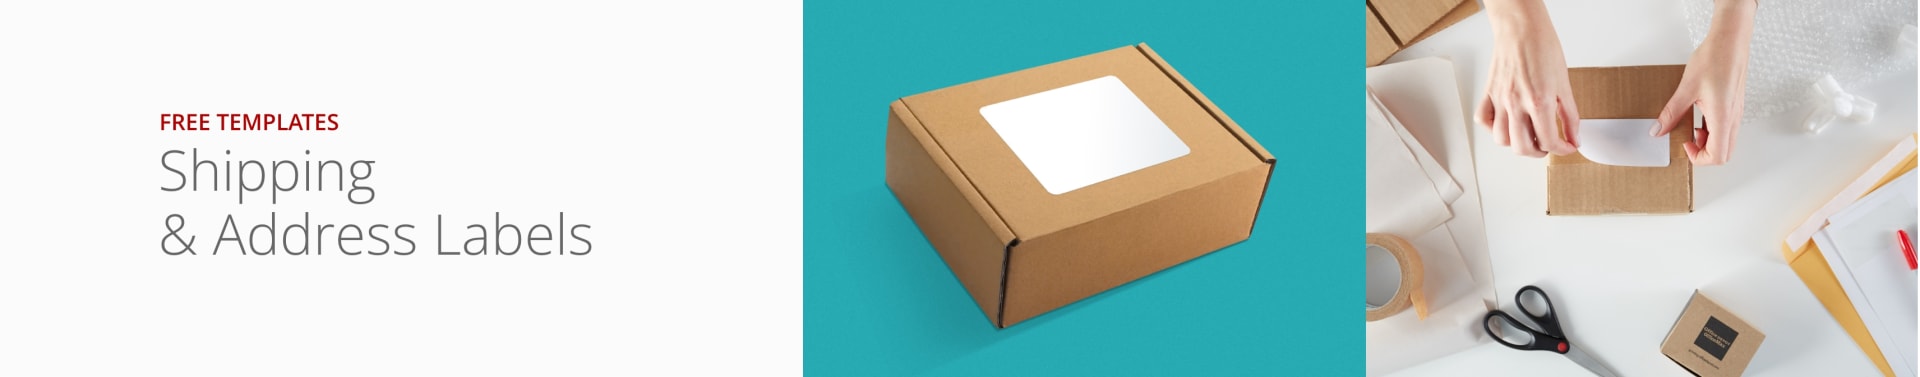 Shipping & Address Label Templates